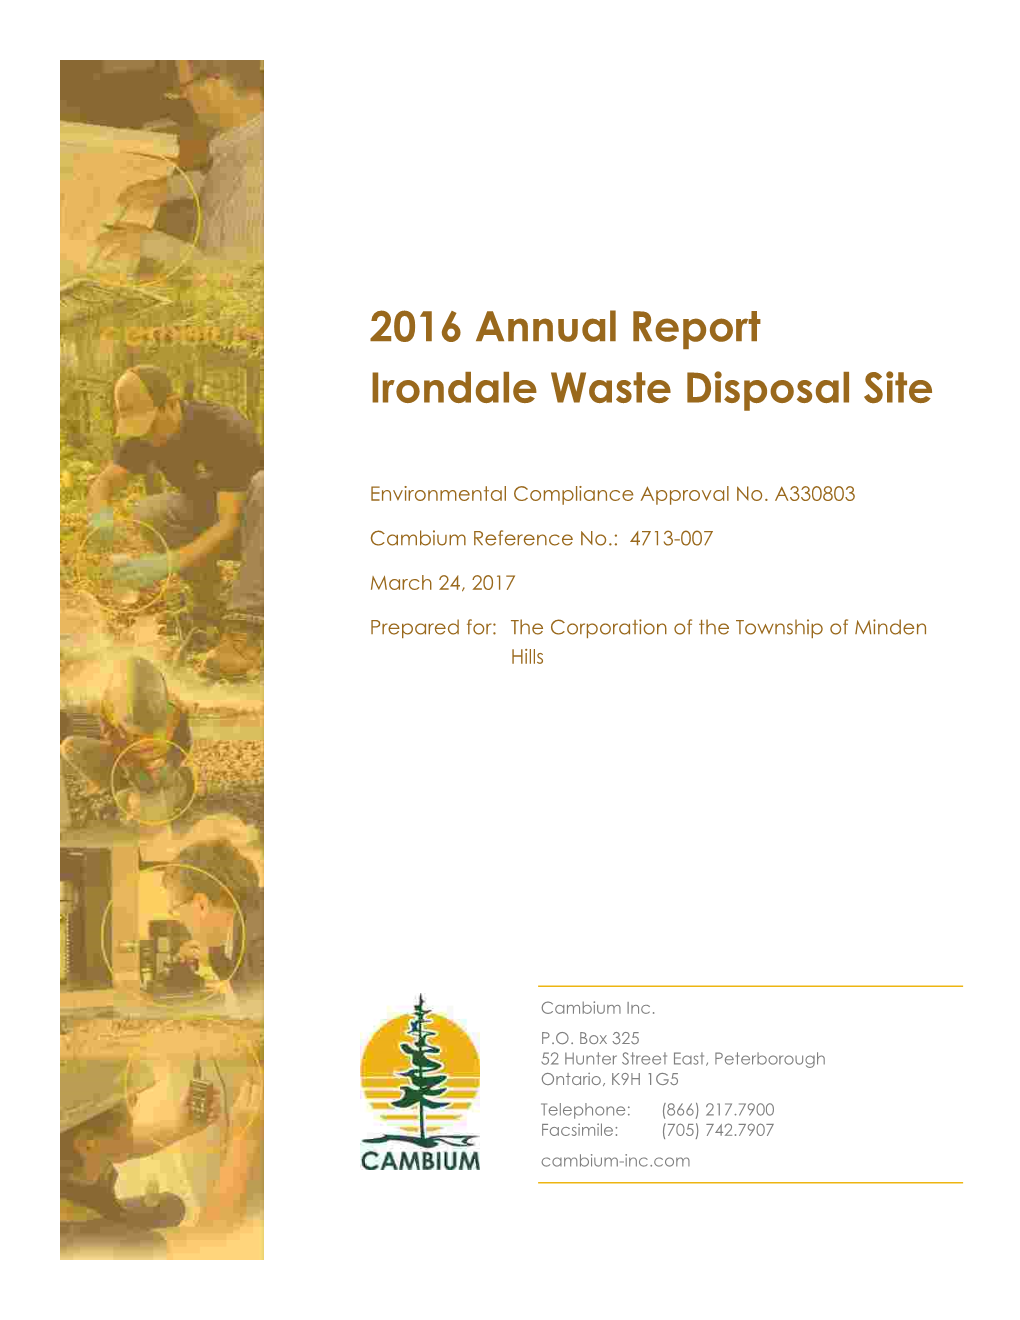 2016 Annual Report Irondale Waste Disposal Site